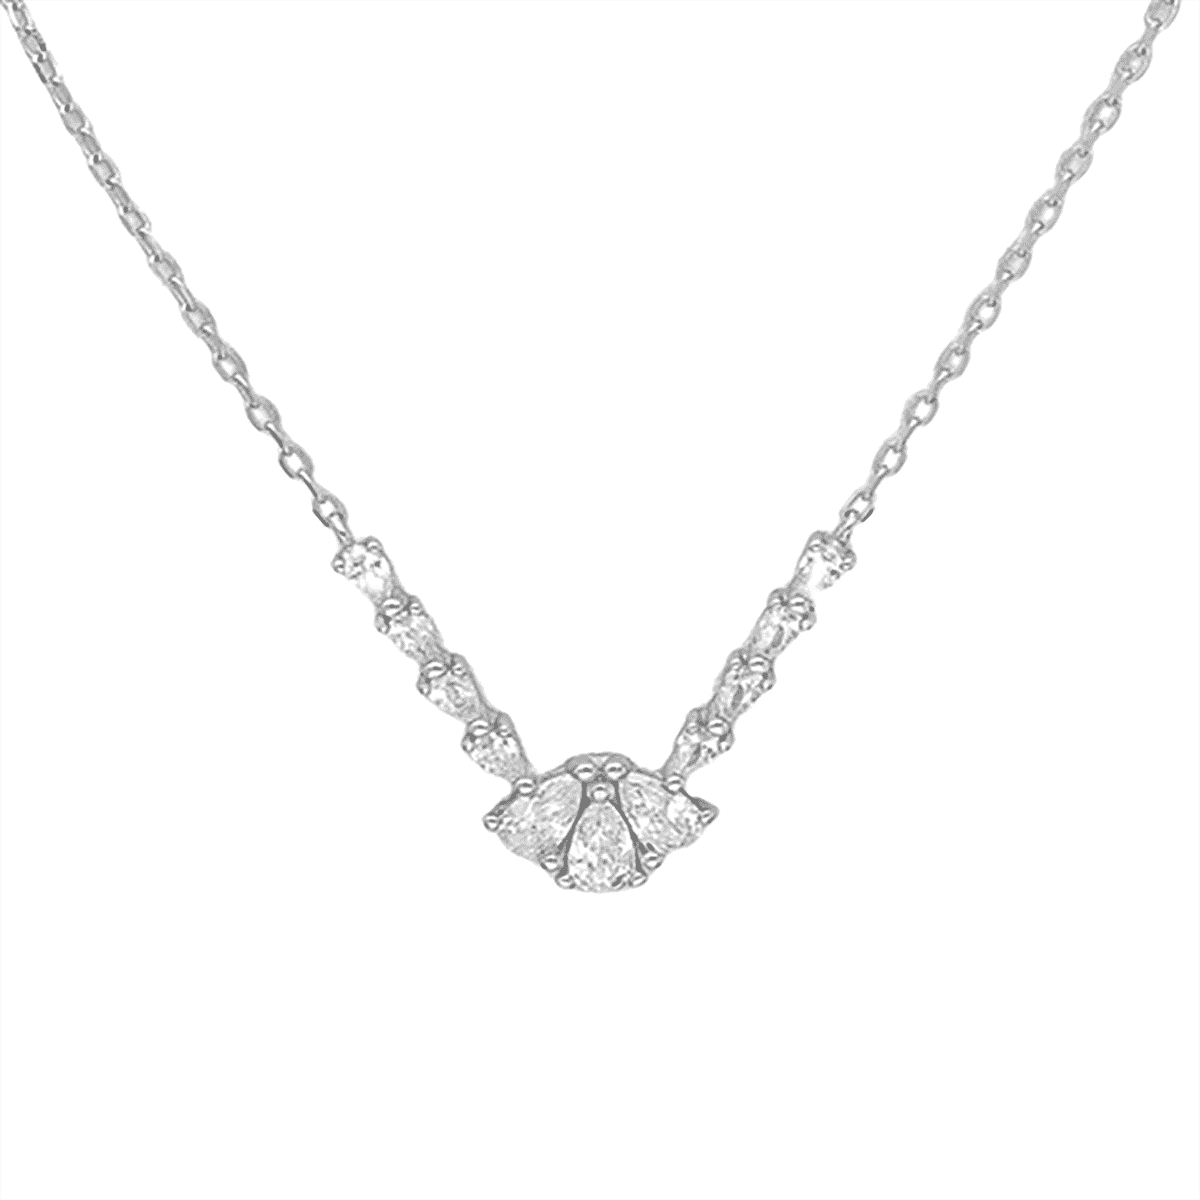 Asfour 925 Sterling Silver Necklace - NT0129